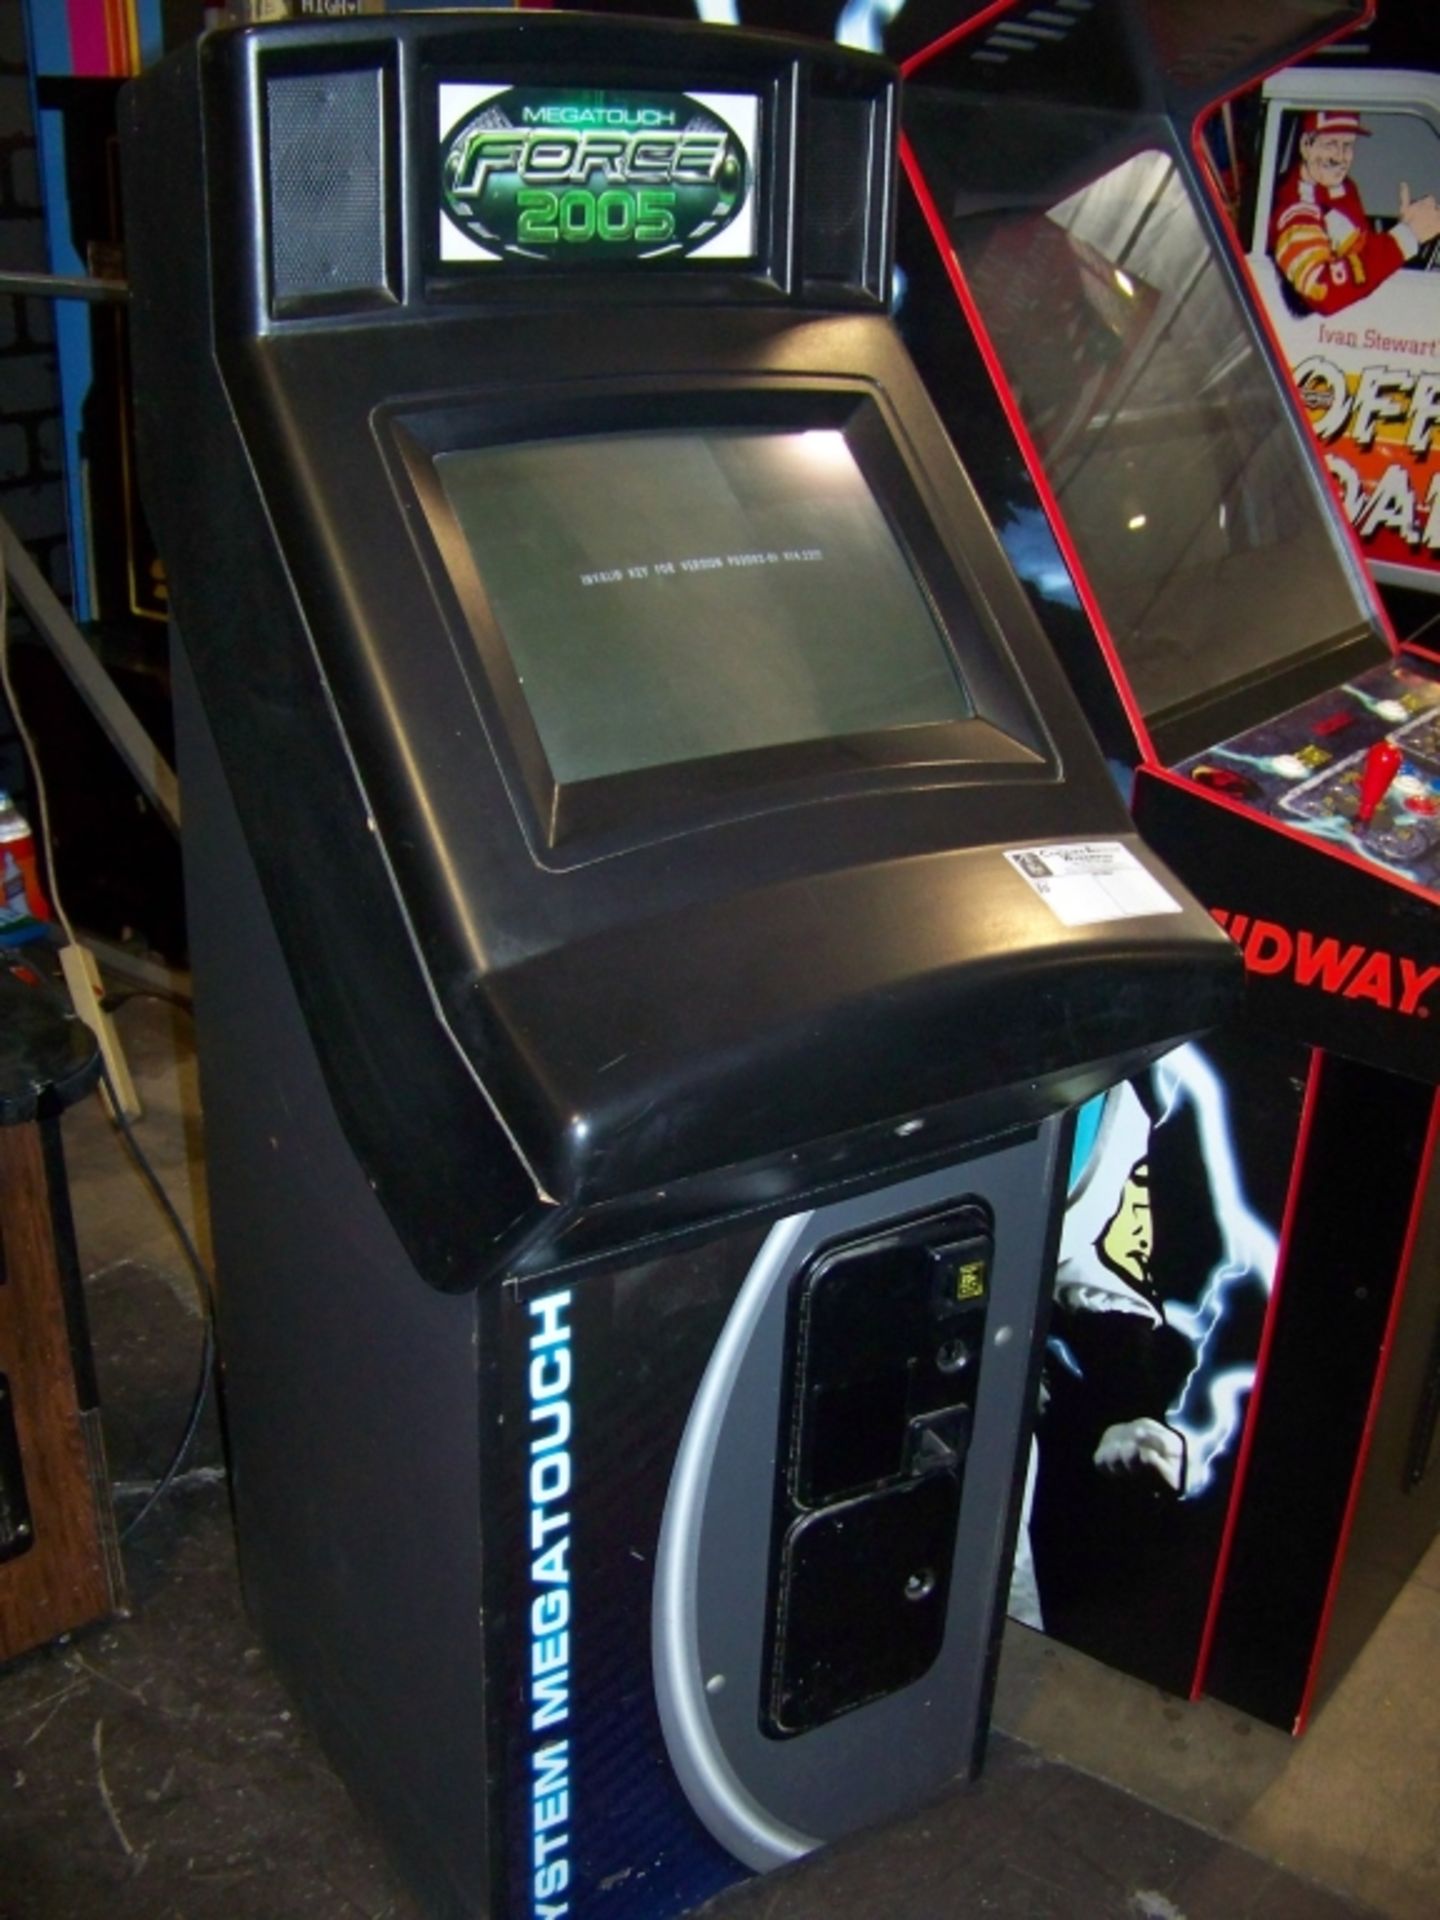 MEGATOUCH FORCE 2005 UPRIGHT ARCADE GAME Item is in used condition. Evidence of wear and